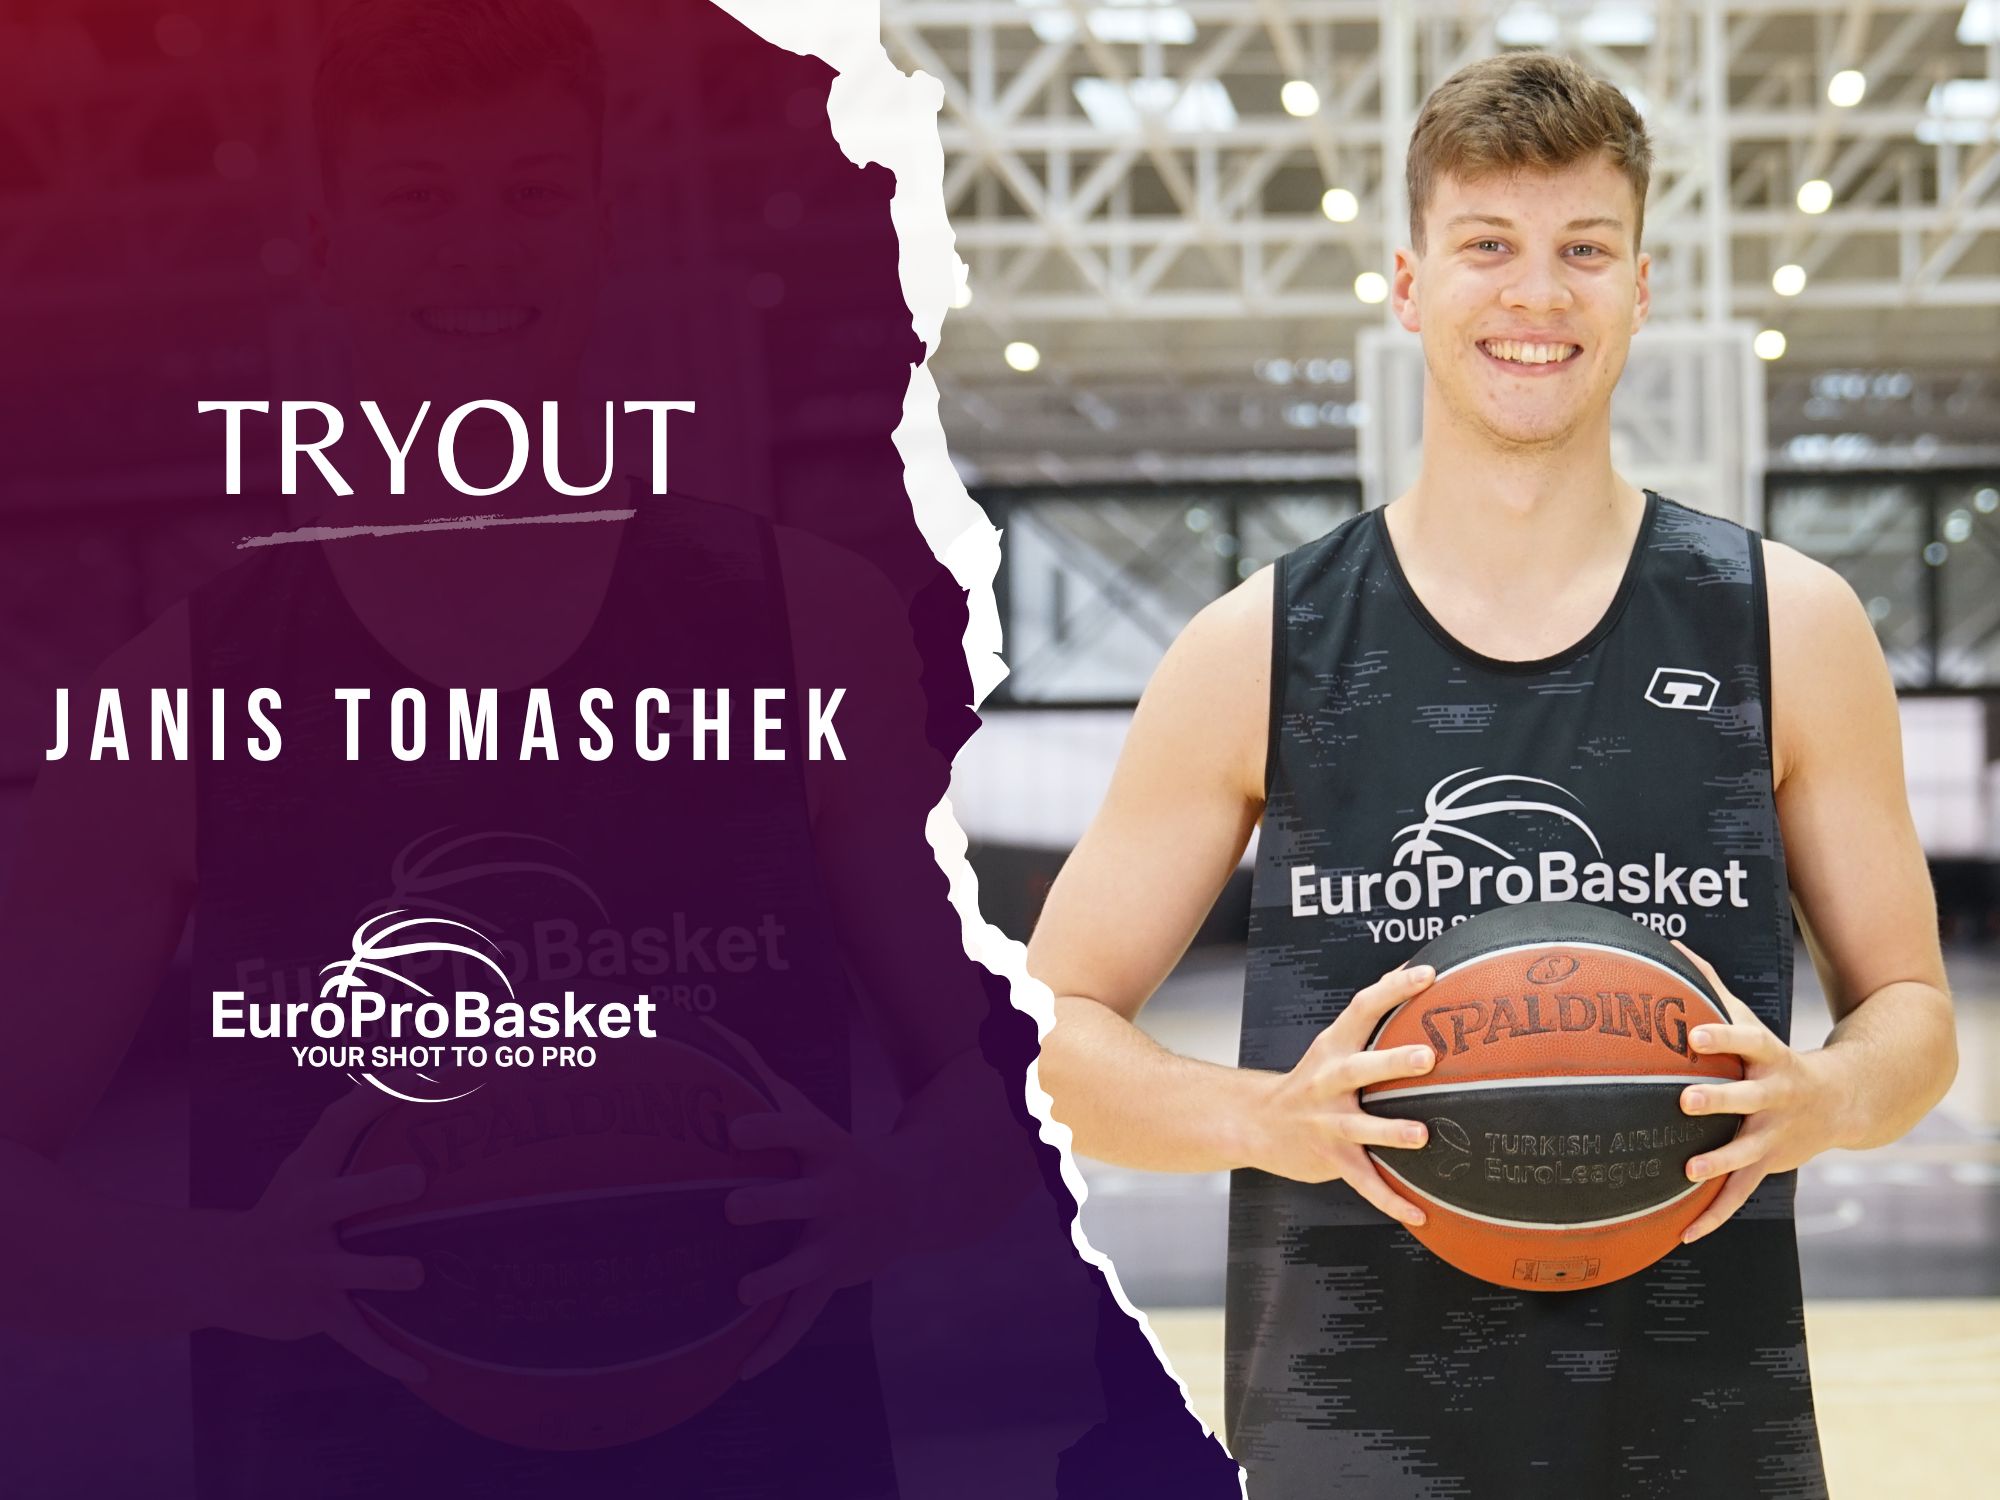 EuroProBasket Player on Tryout in Spain